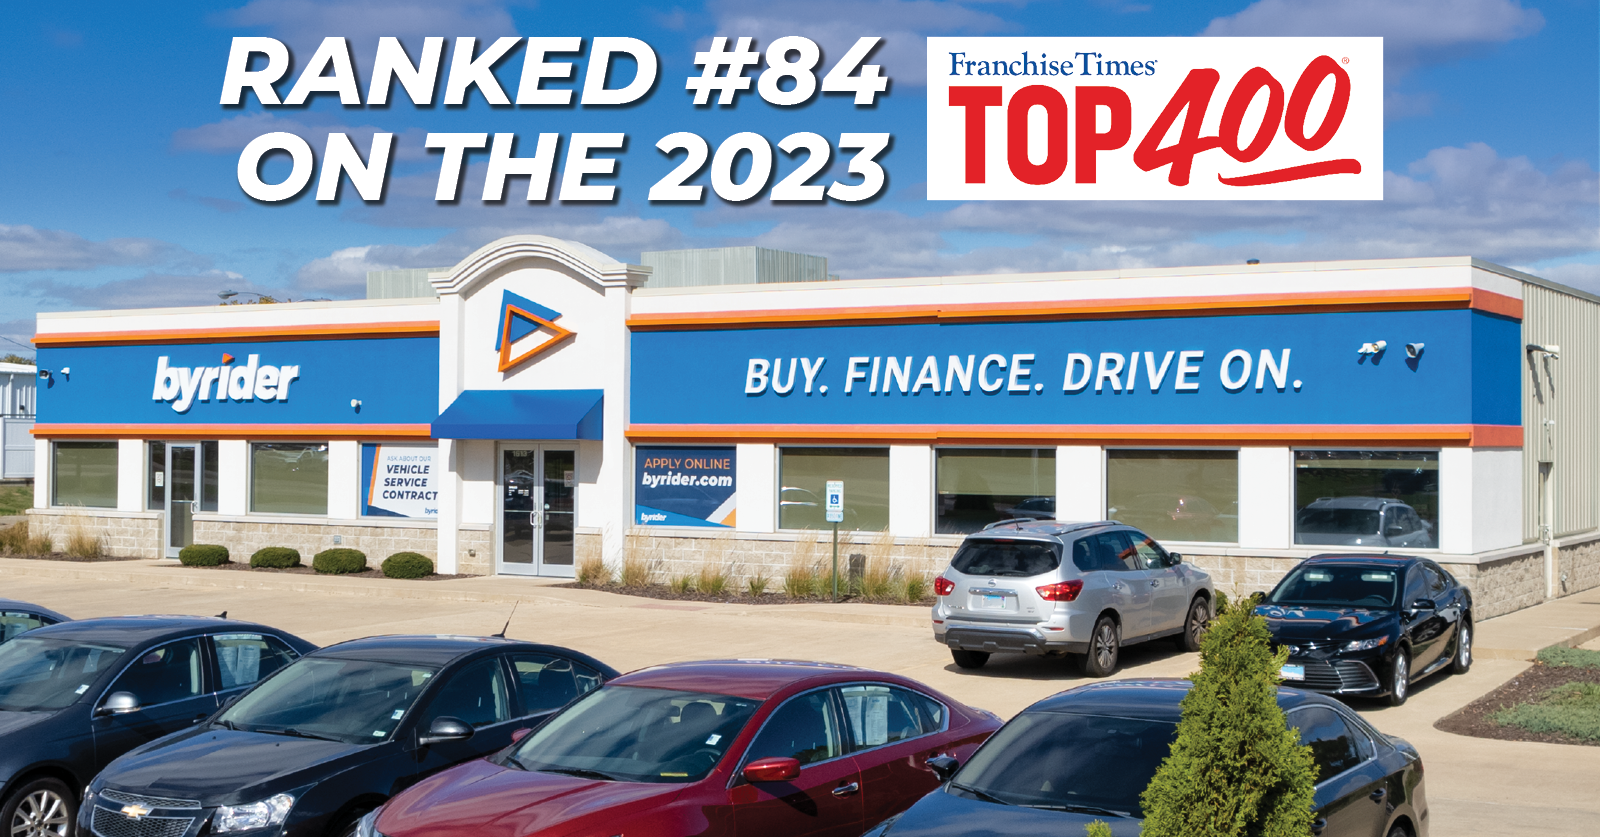 BYRIDER NAMED A TOP FRANCHISE OPPORTUNITY